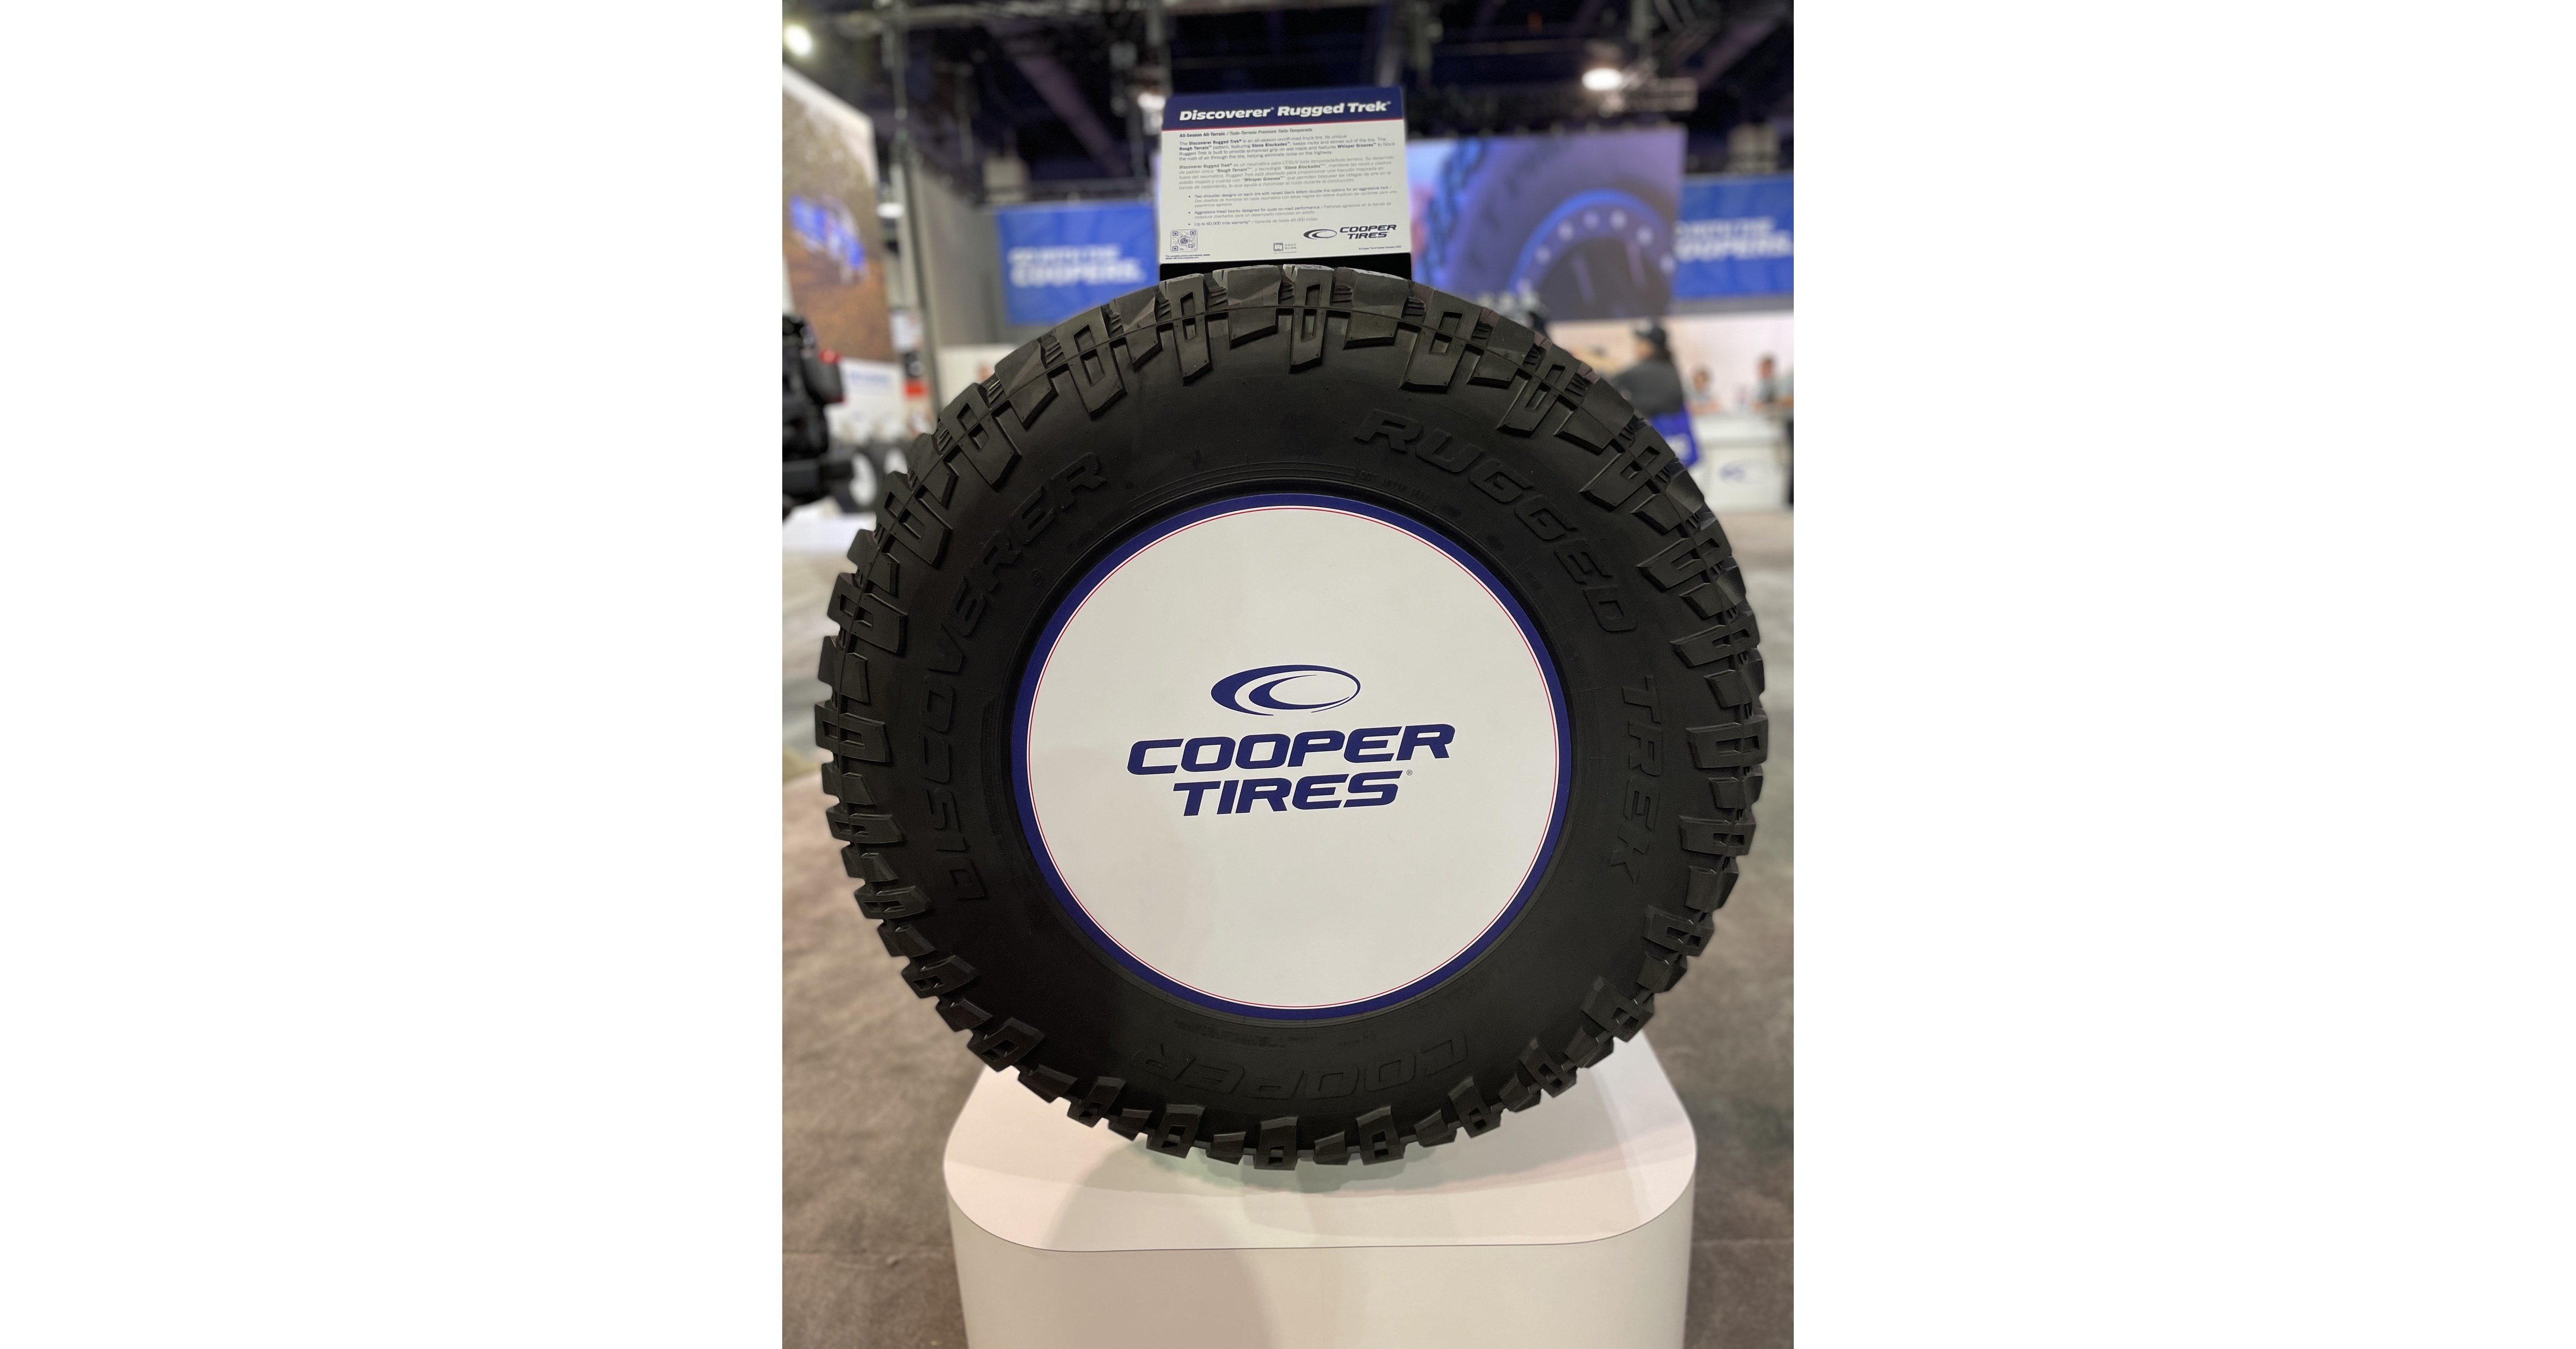 GOODYEAR UNVEILS THE LARGEST TIRE IN ITS COOPER DISCOVERER® RUGGED TREK™  LINE WITH TWO NEW 37-INCH OPTIONS